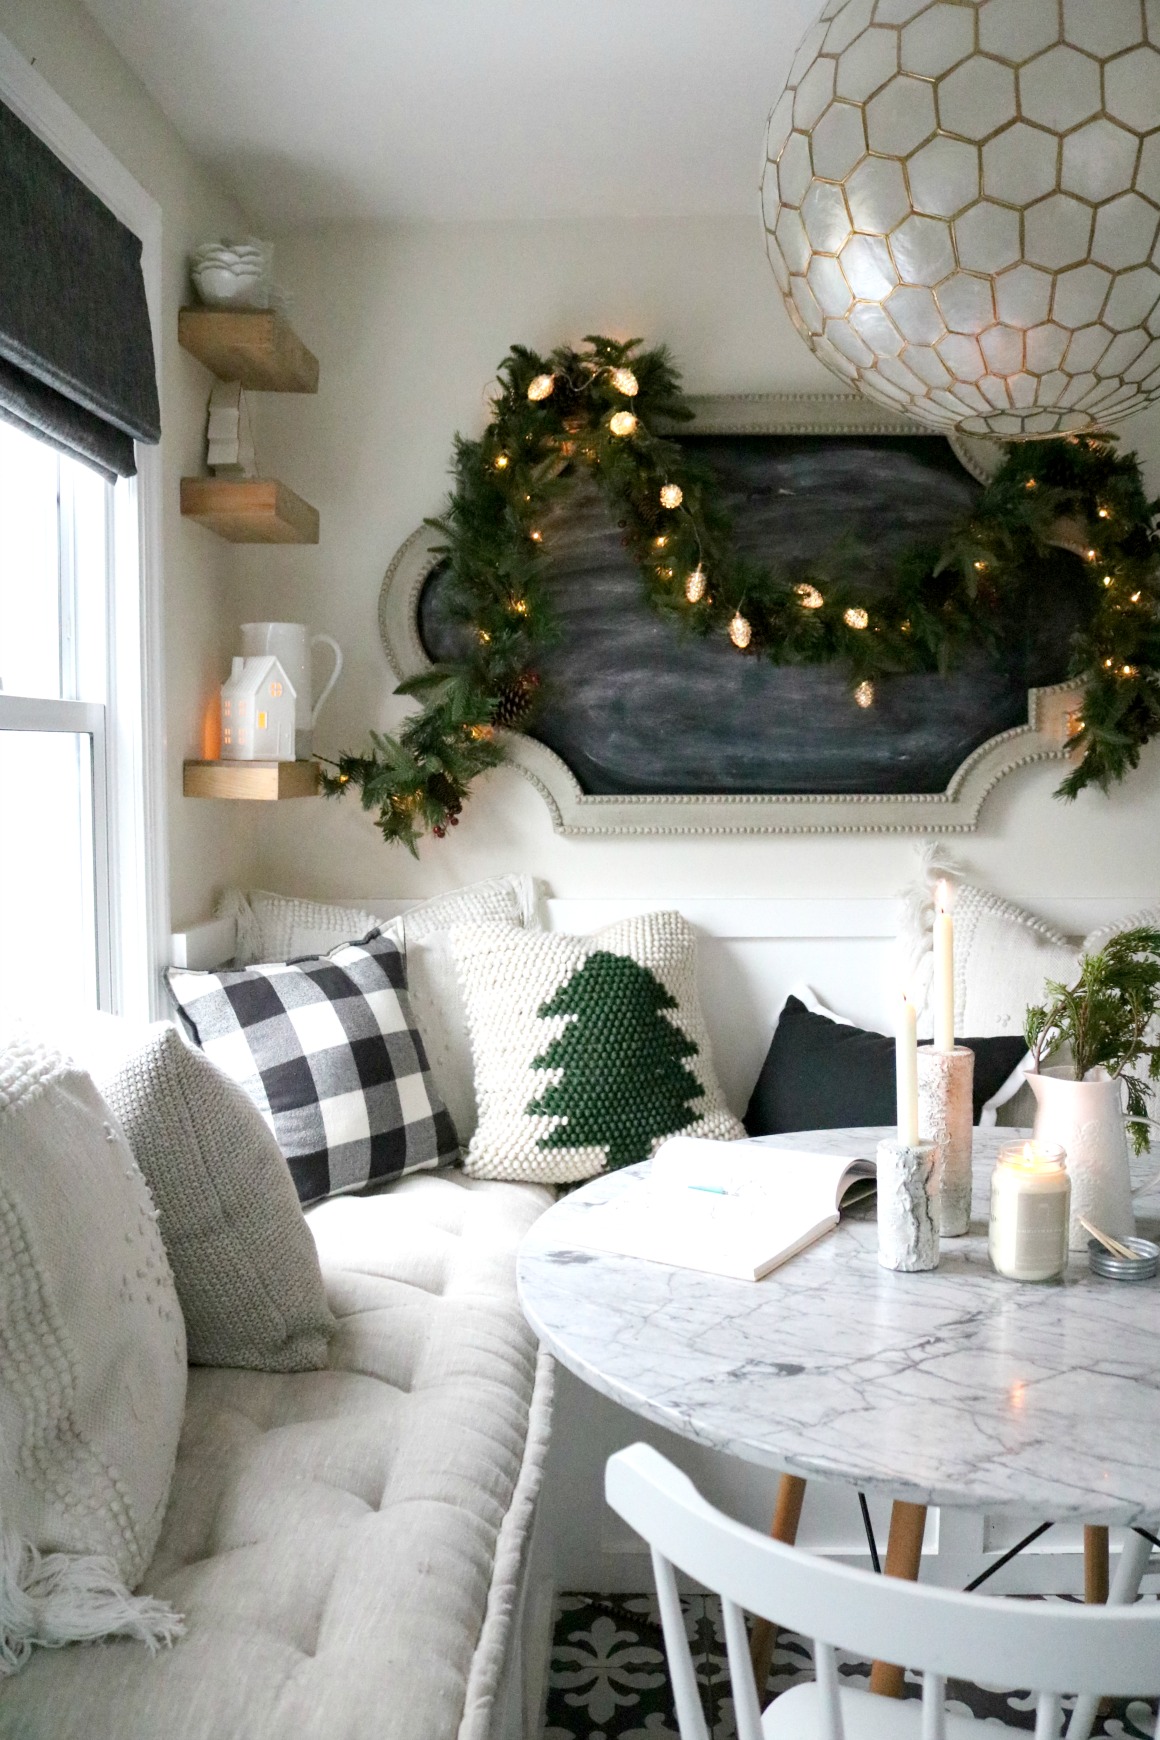 Hygge Christmas- How to Create a Merry Hygge Christmas